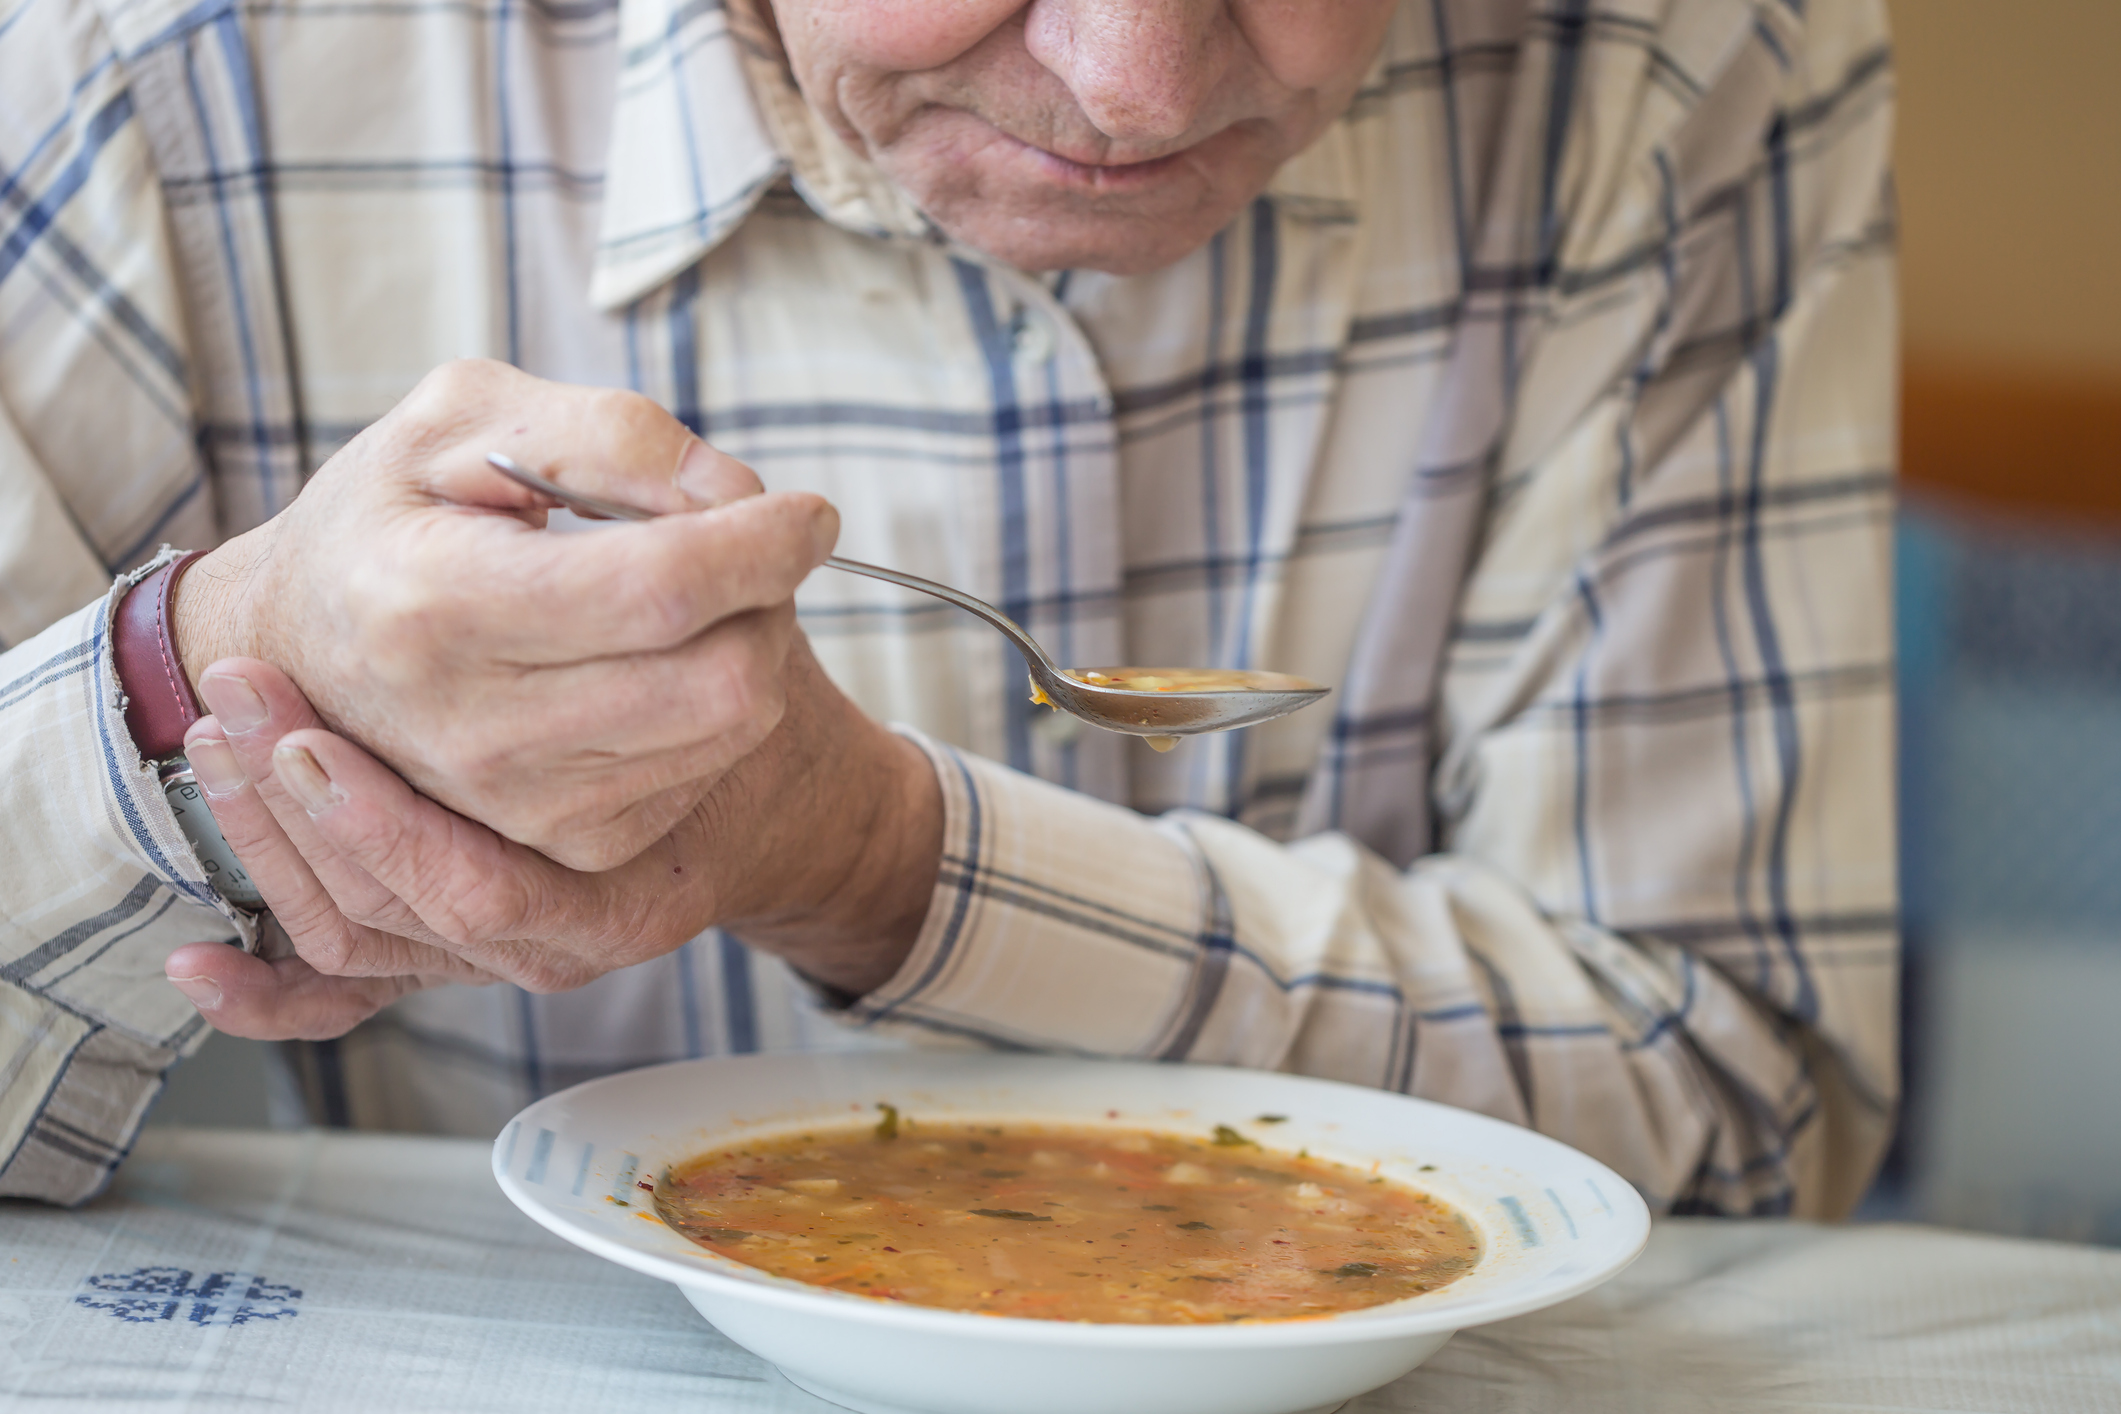  A elderly white man in a white plaid shirt seated at a dining table holds his wrist to stabilize his hand as he lifts a spoonful of soup to his mouth